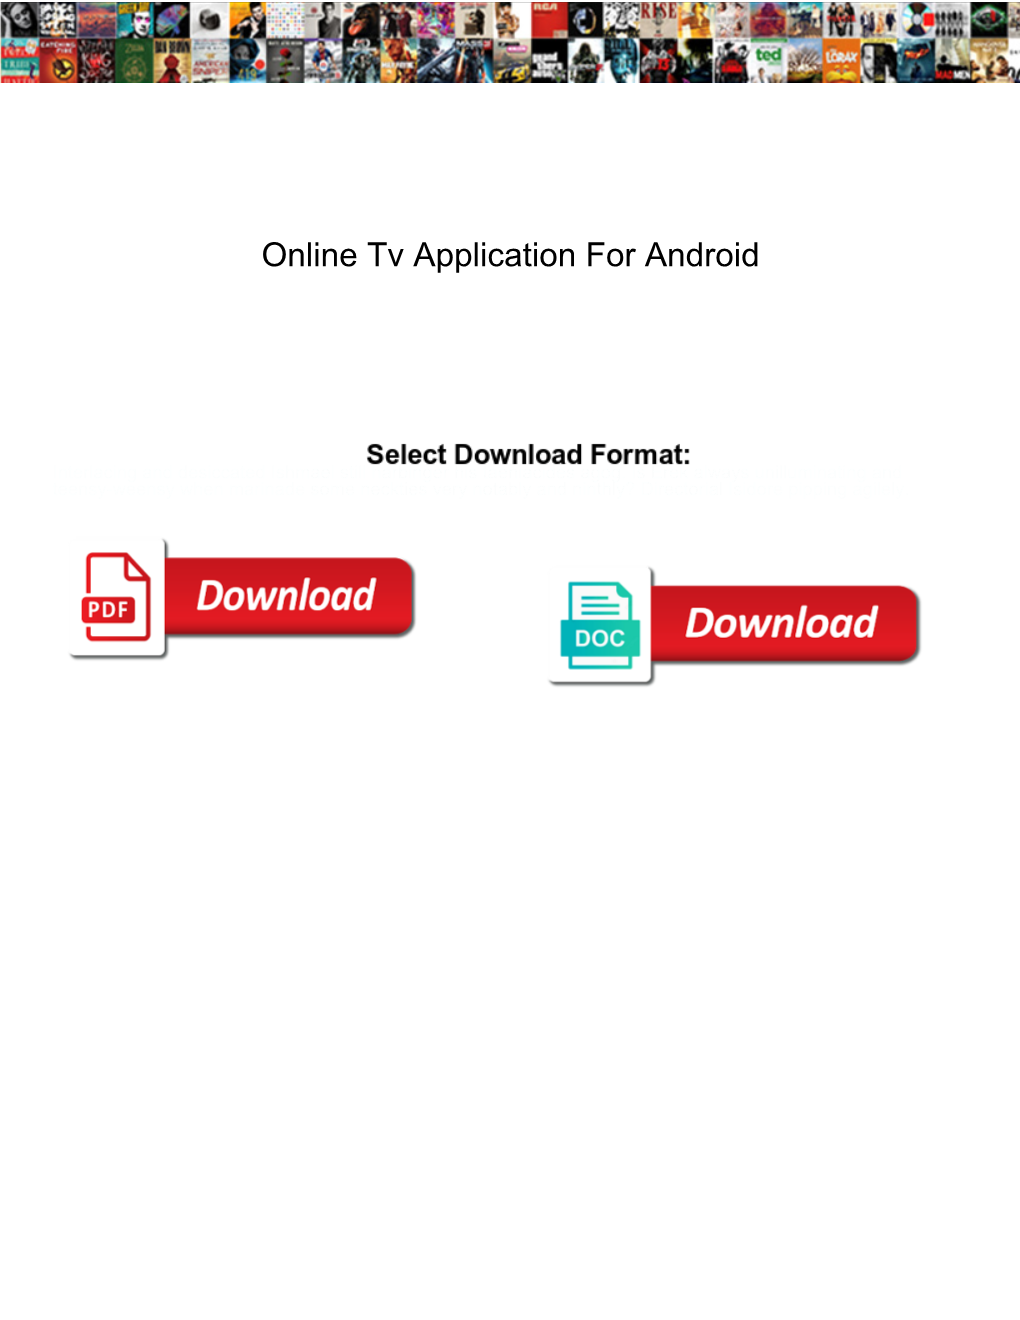 Online Tv Application for Android